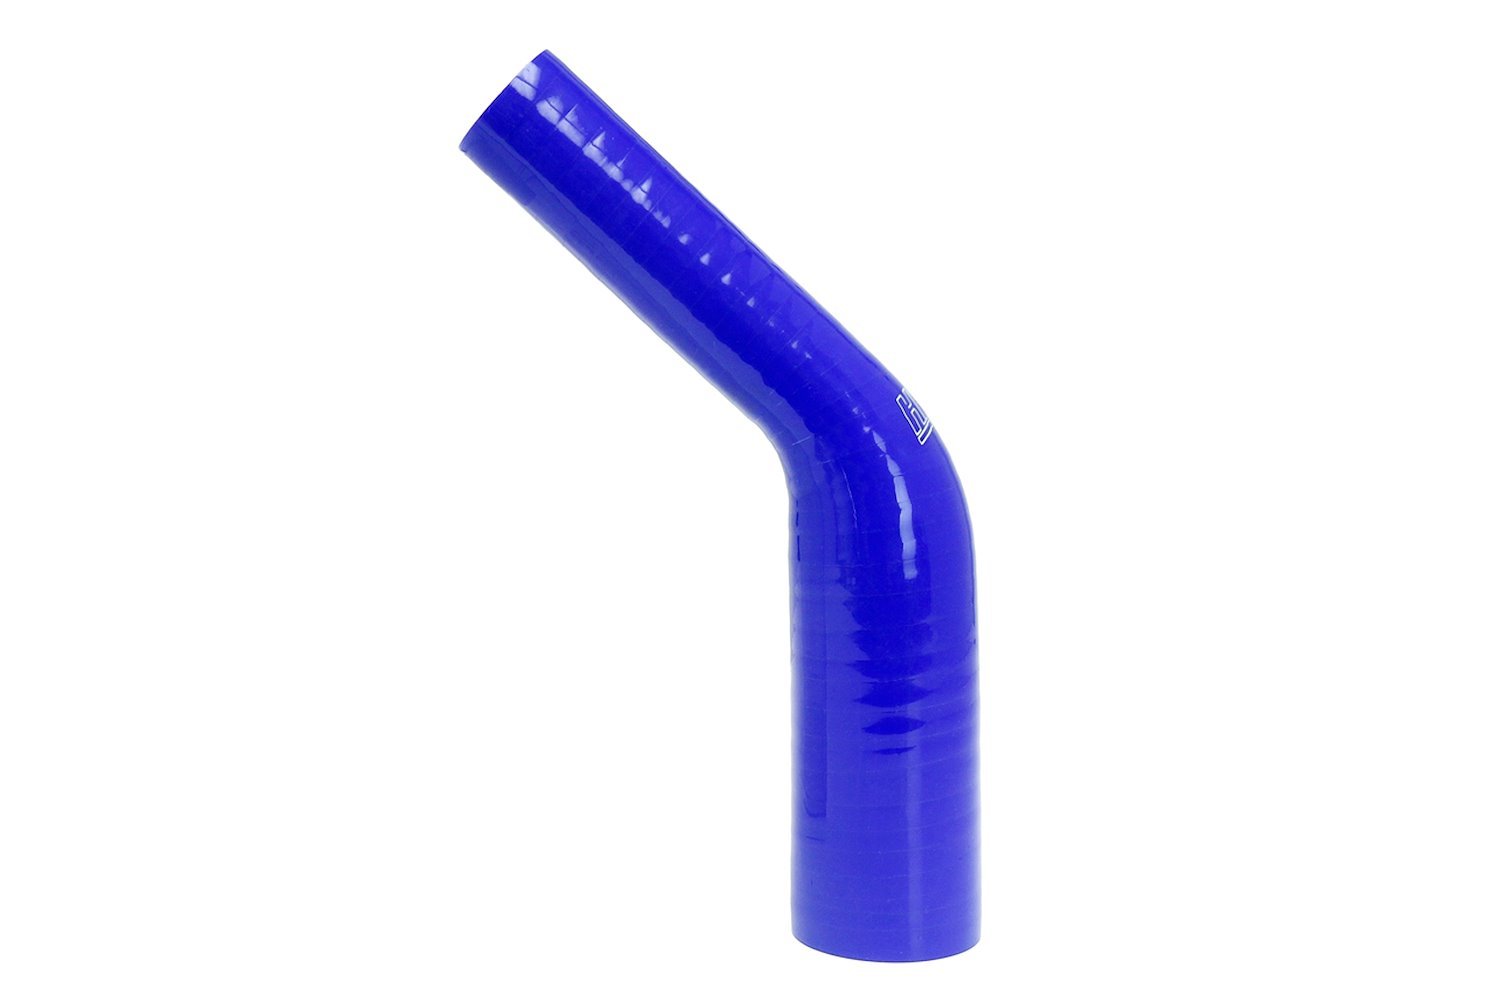 HTSER45-100-138-BLUE Silicone 45-Degree Elbow Hose, High-Temp 4-Ply Reinforced, 1 in. - 1-3/8 in. ID, Blue